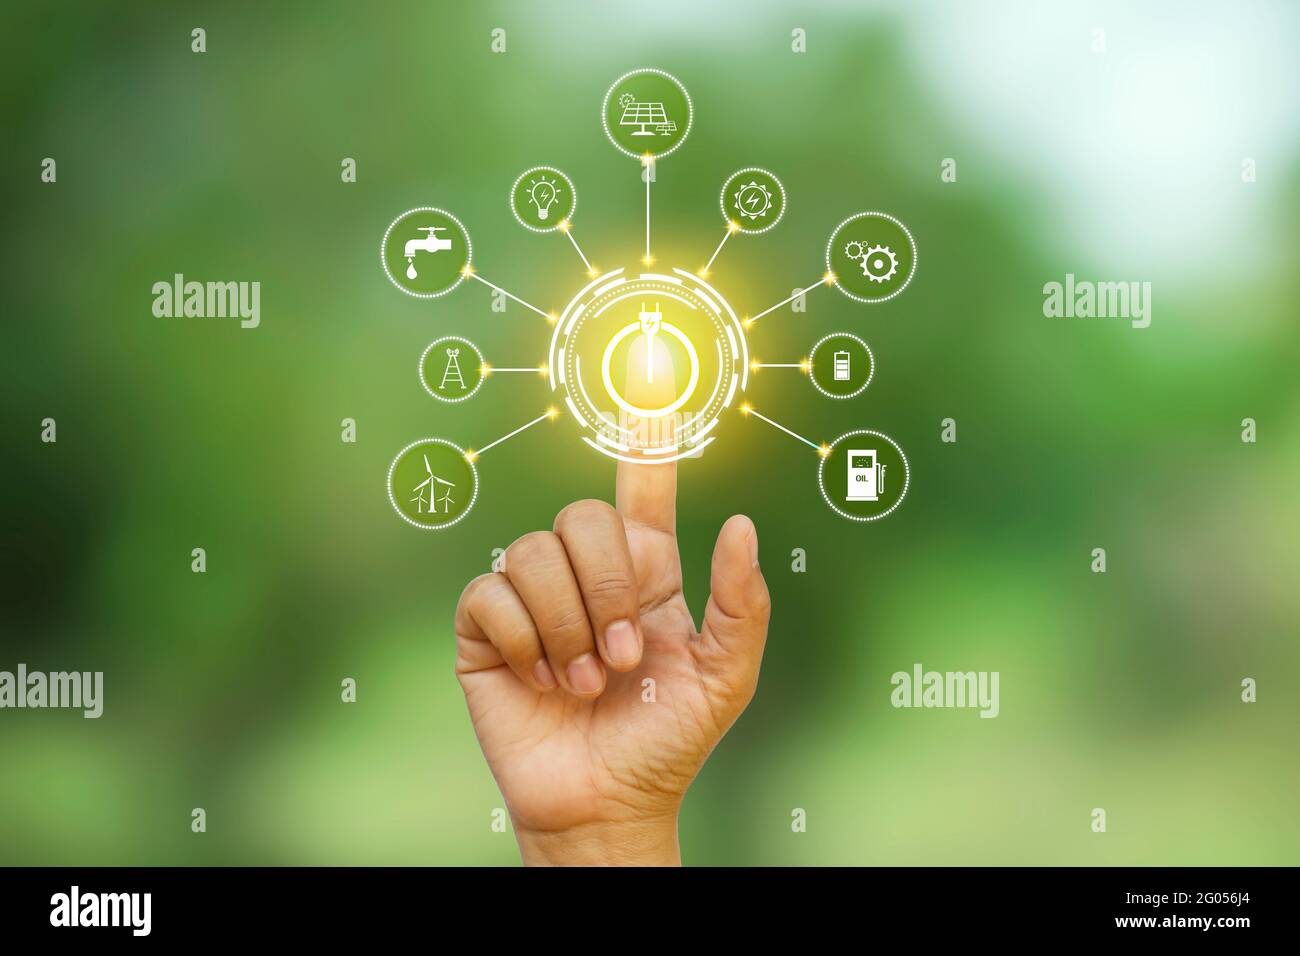 Businessmen click on the icon of the switch to save energy, including the icon about energy, energy saving ideas and eco-friendly energy consumption. Stock Photo